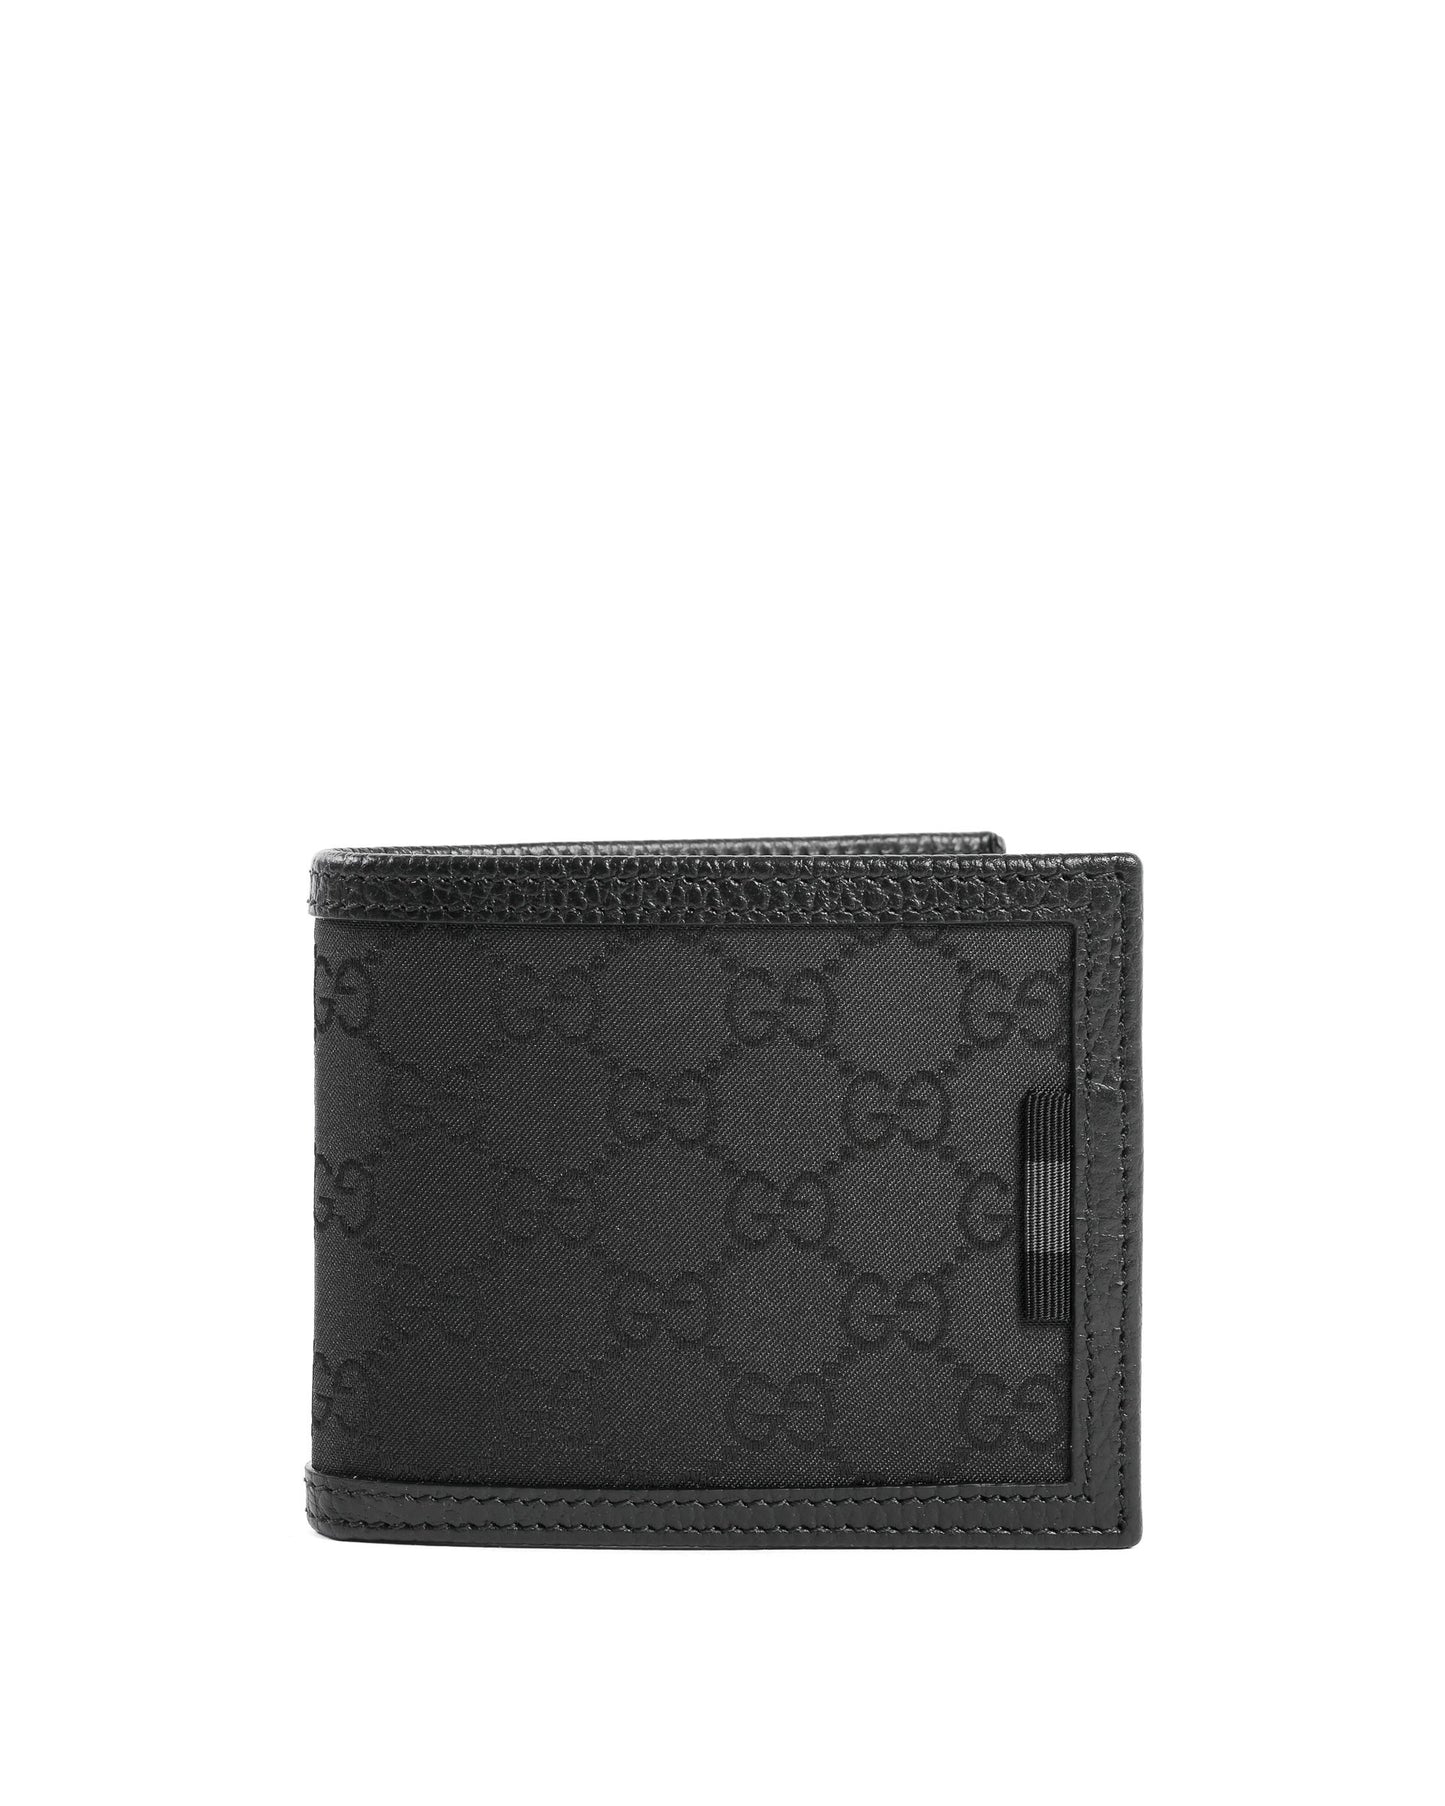 Gucci Monogram fabric and leather wallet 260987 BMJ1N 8615